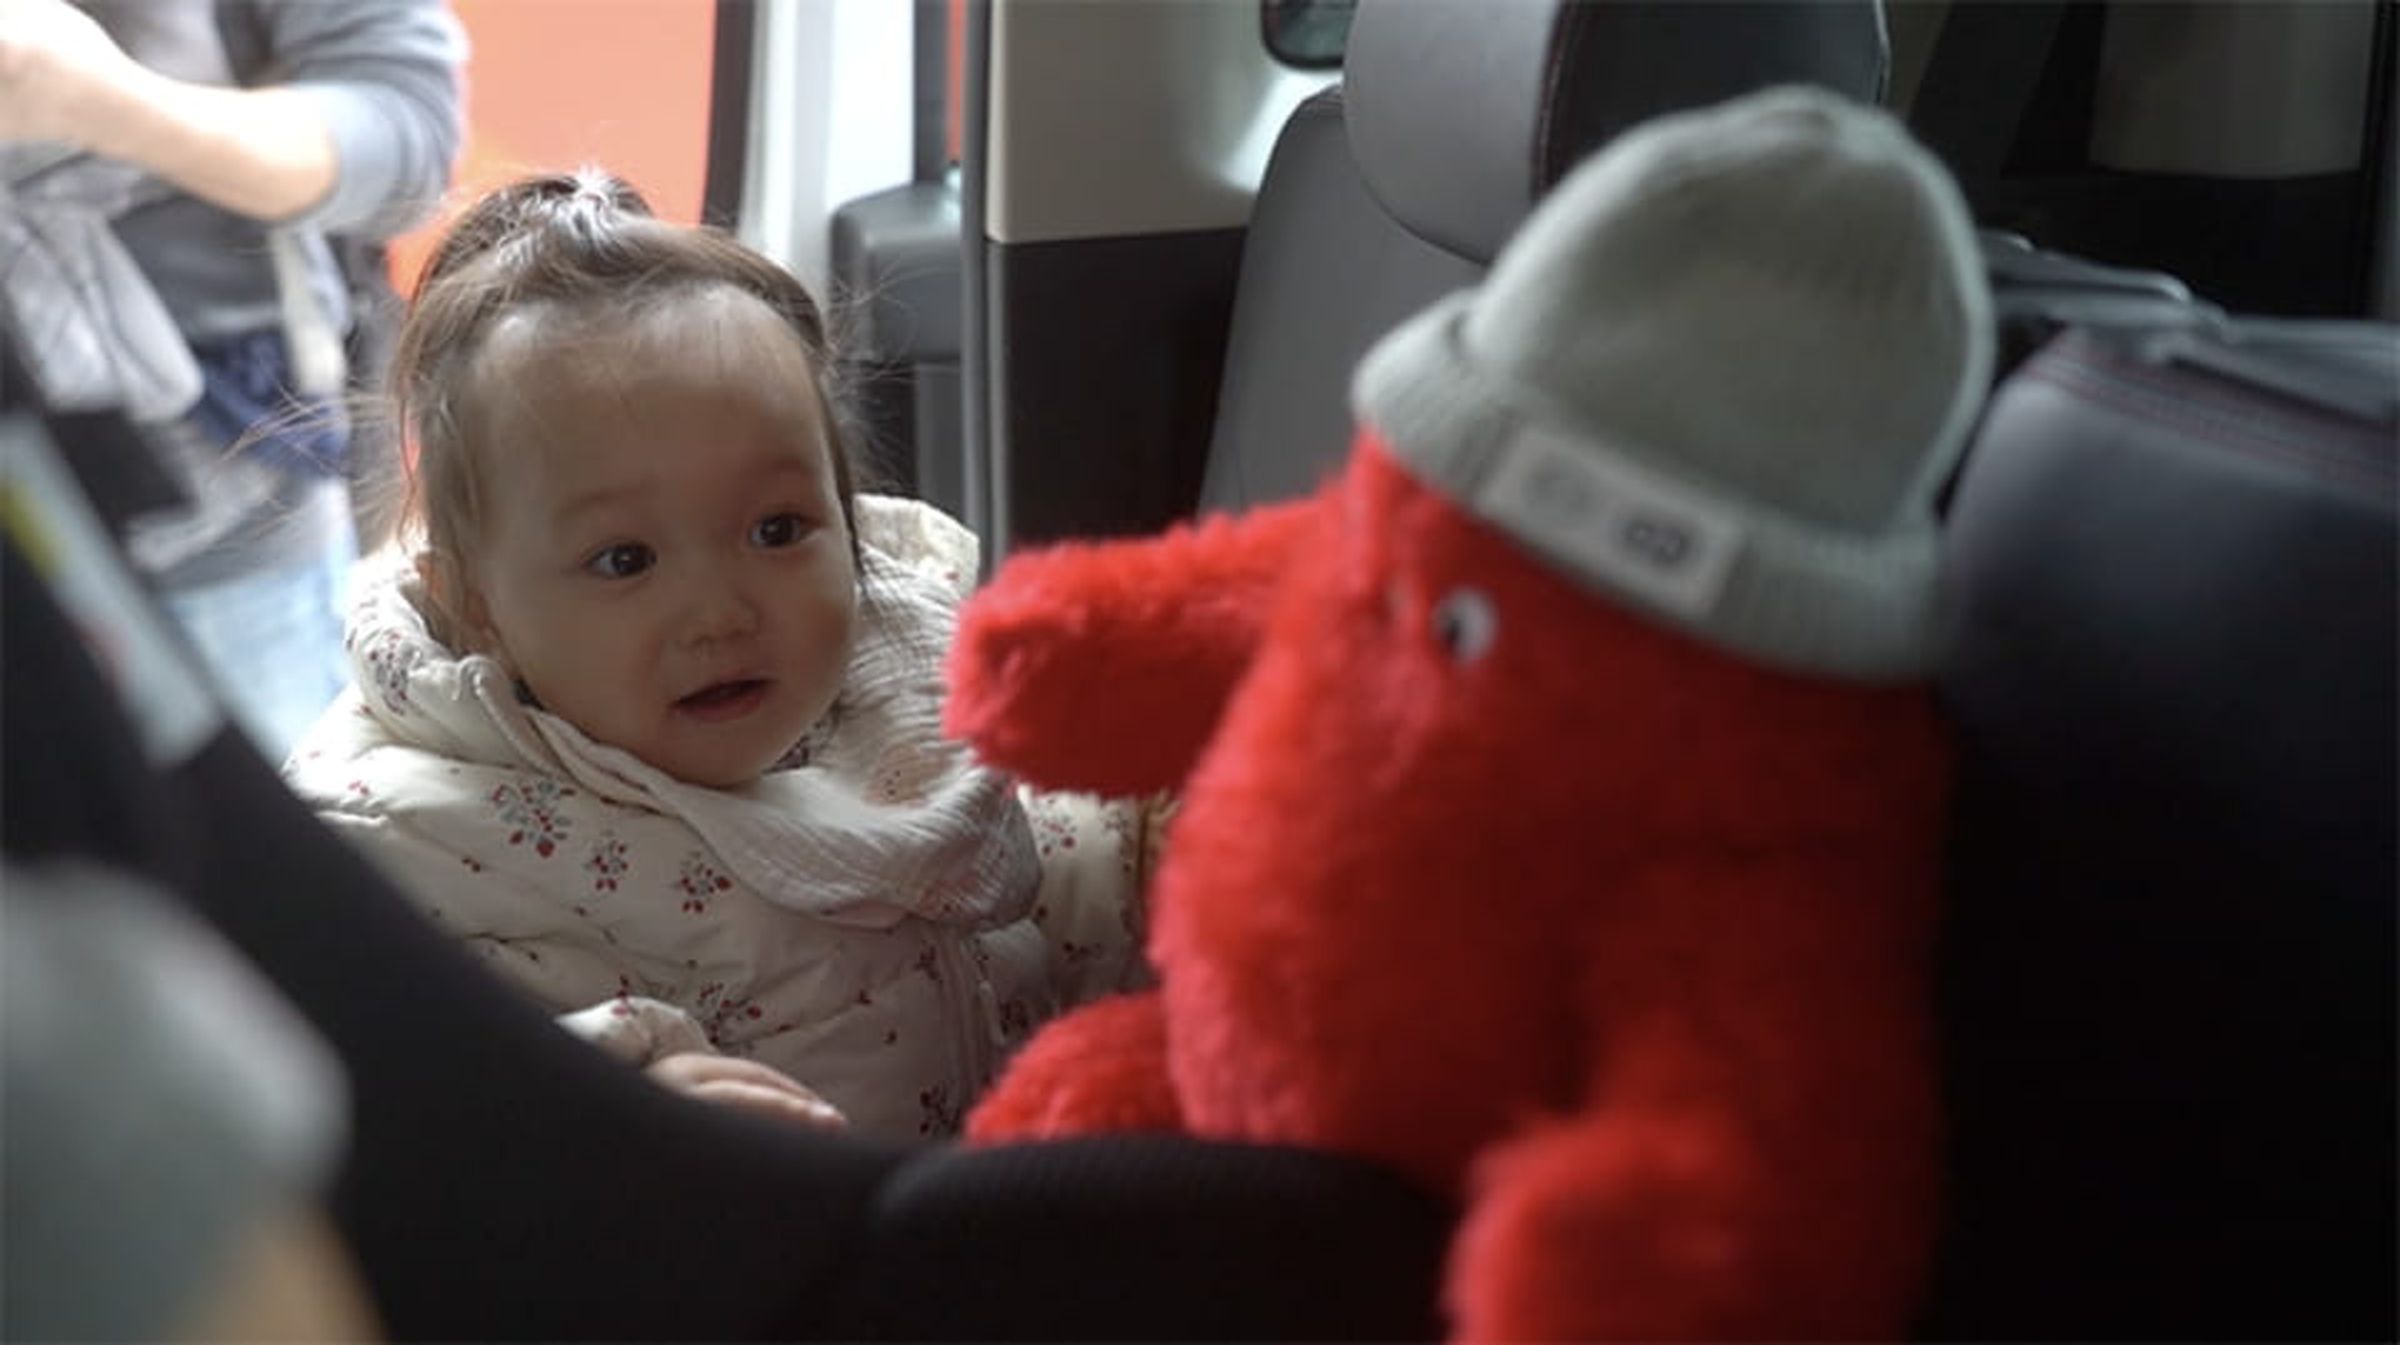 A baby looking at Iruyo in a car.